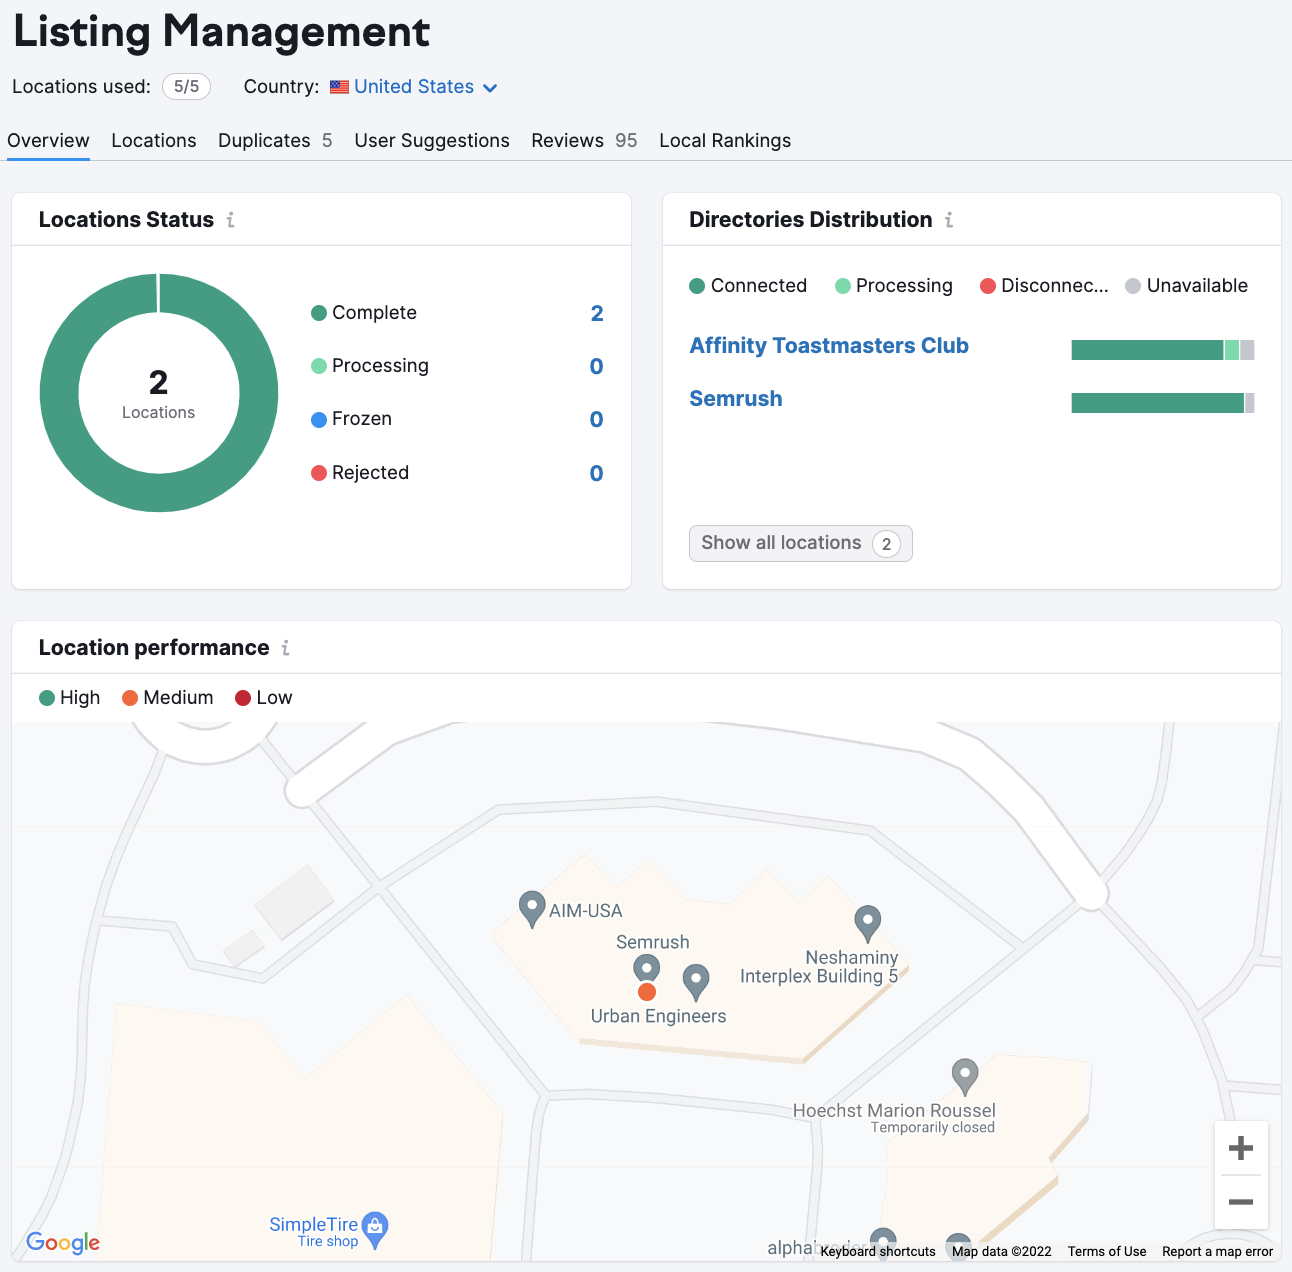 Listing Management Overview image 1